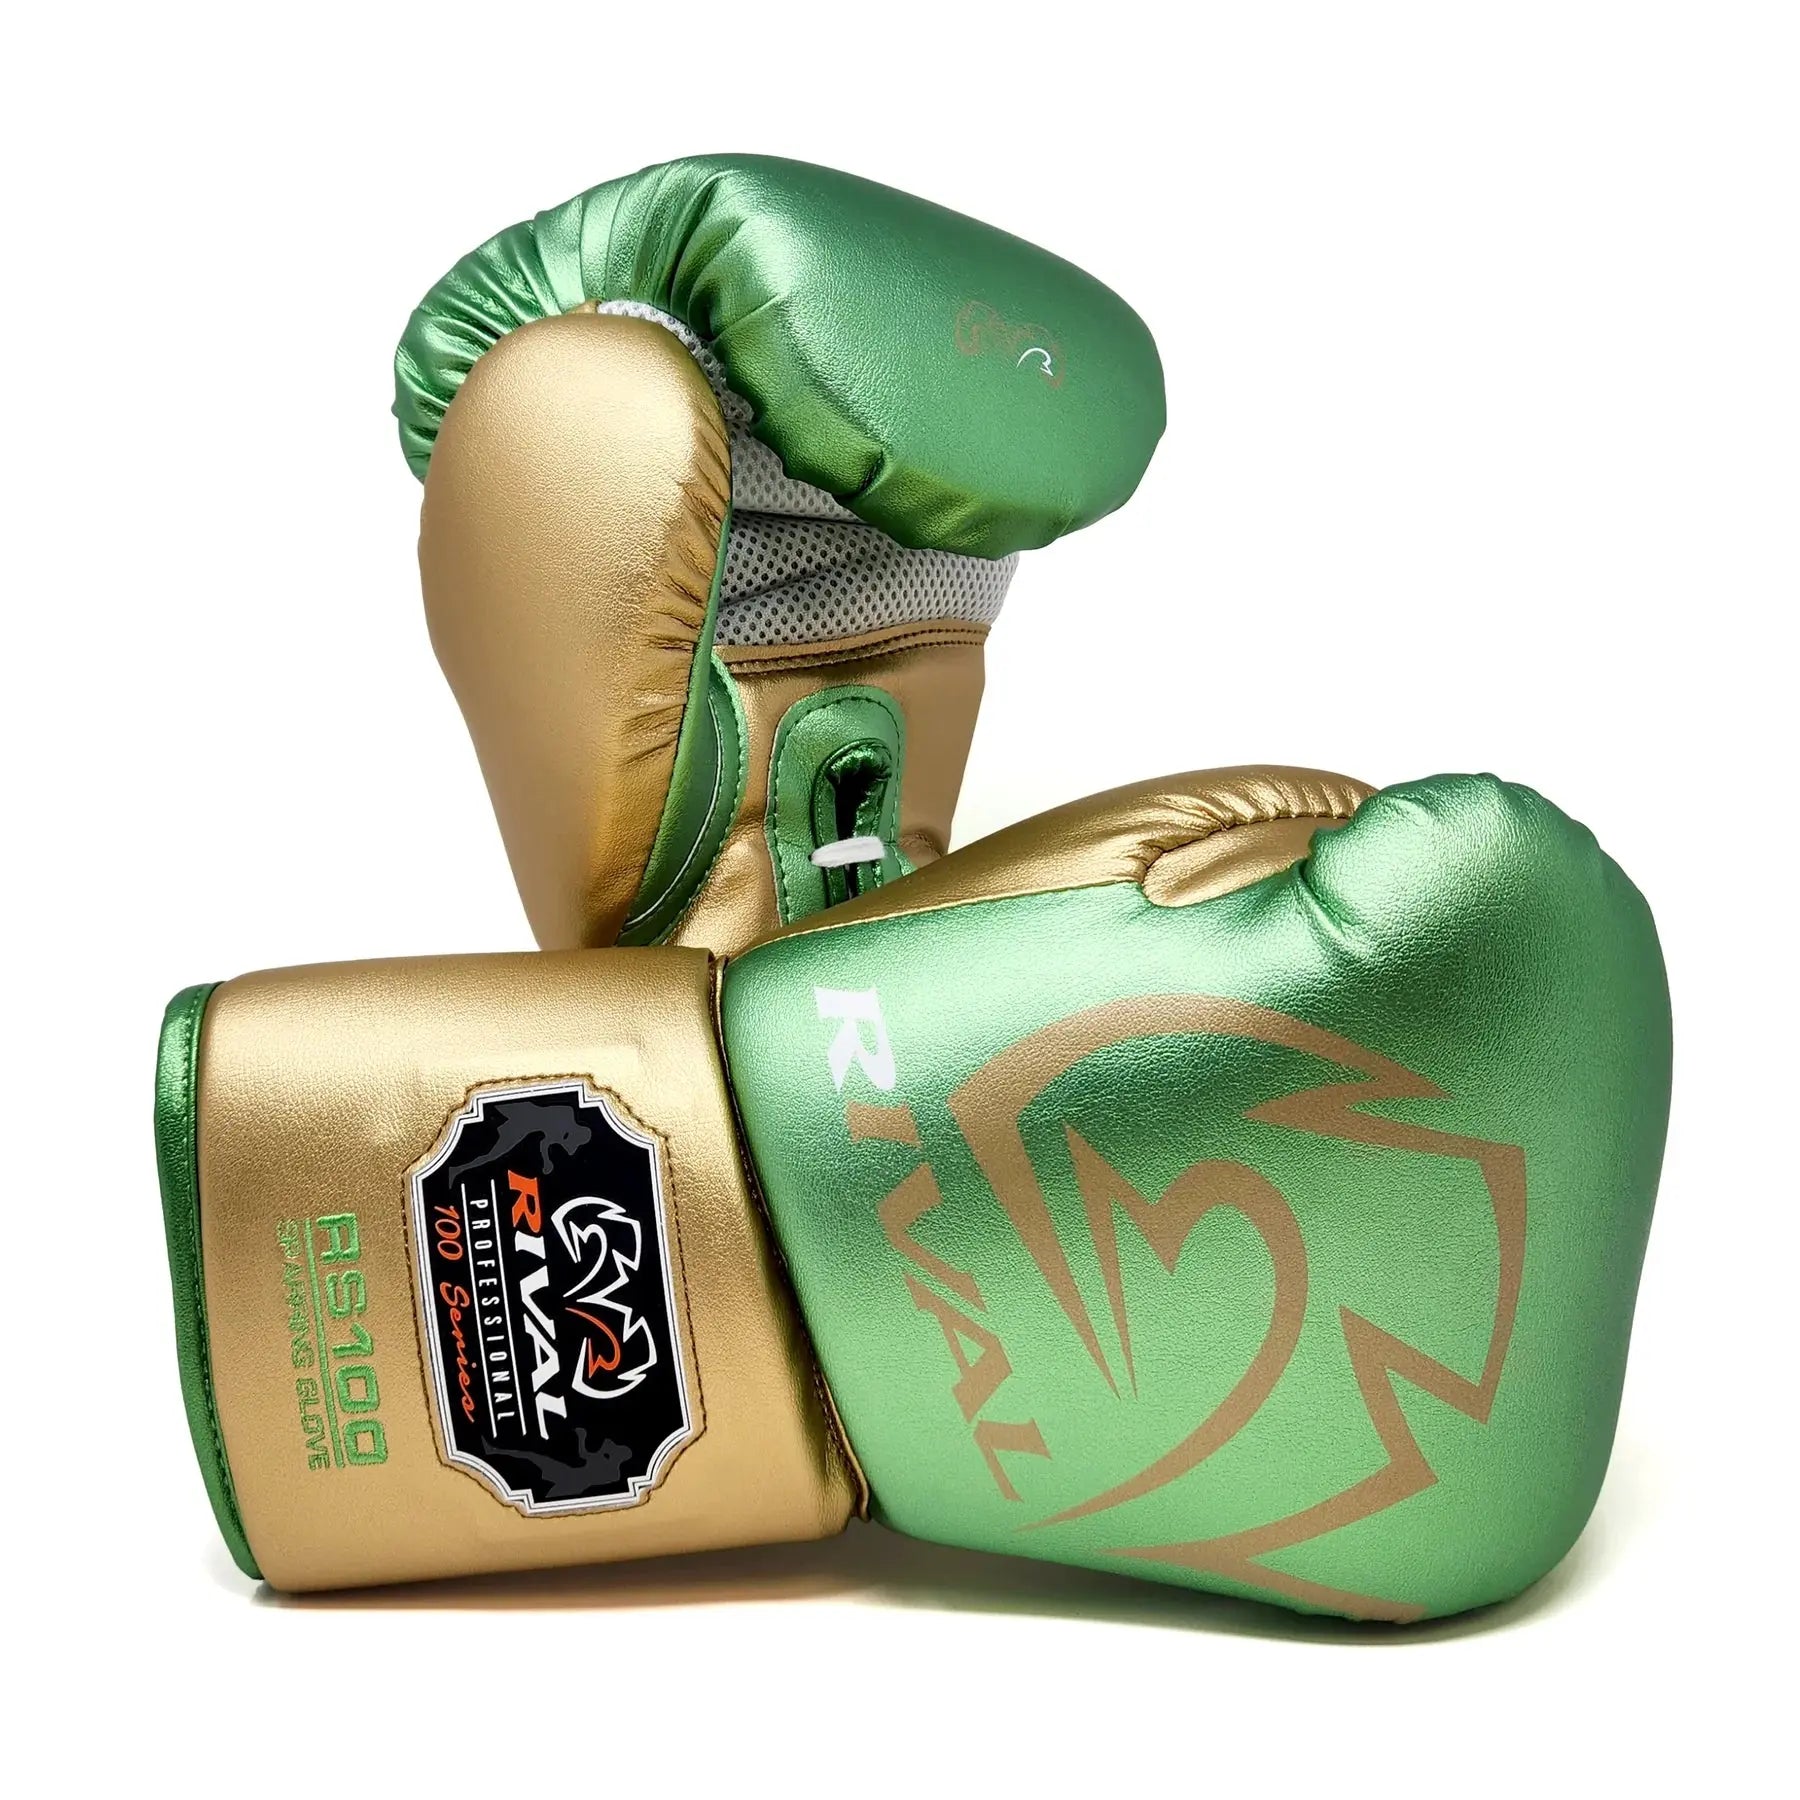 Rival RS100 Professional Sparring Gloves - White Gold Rival